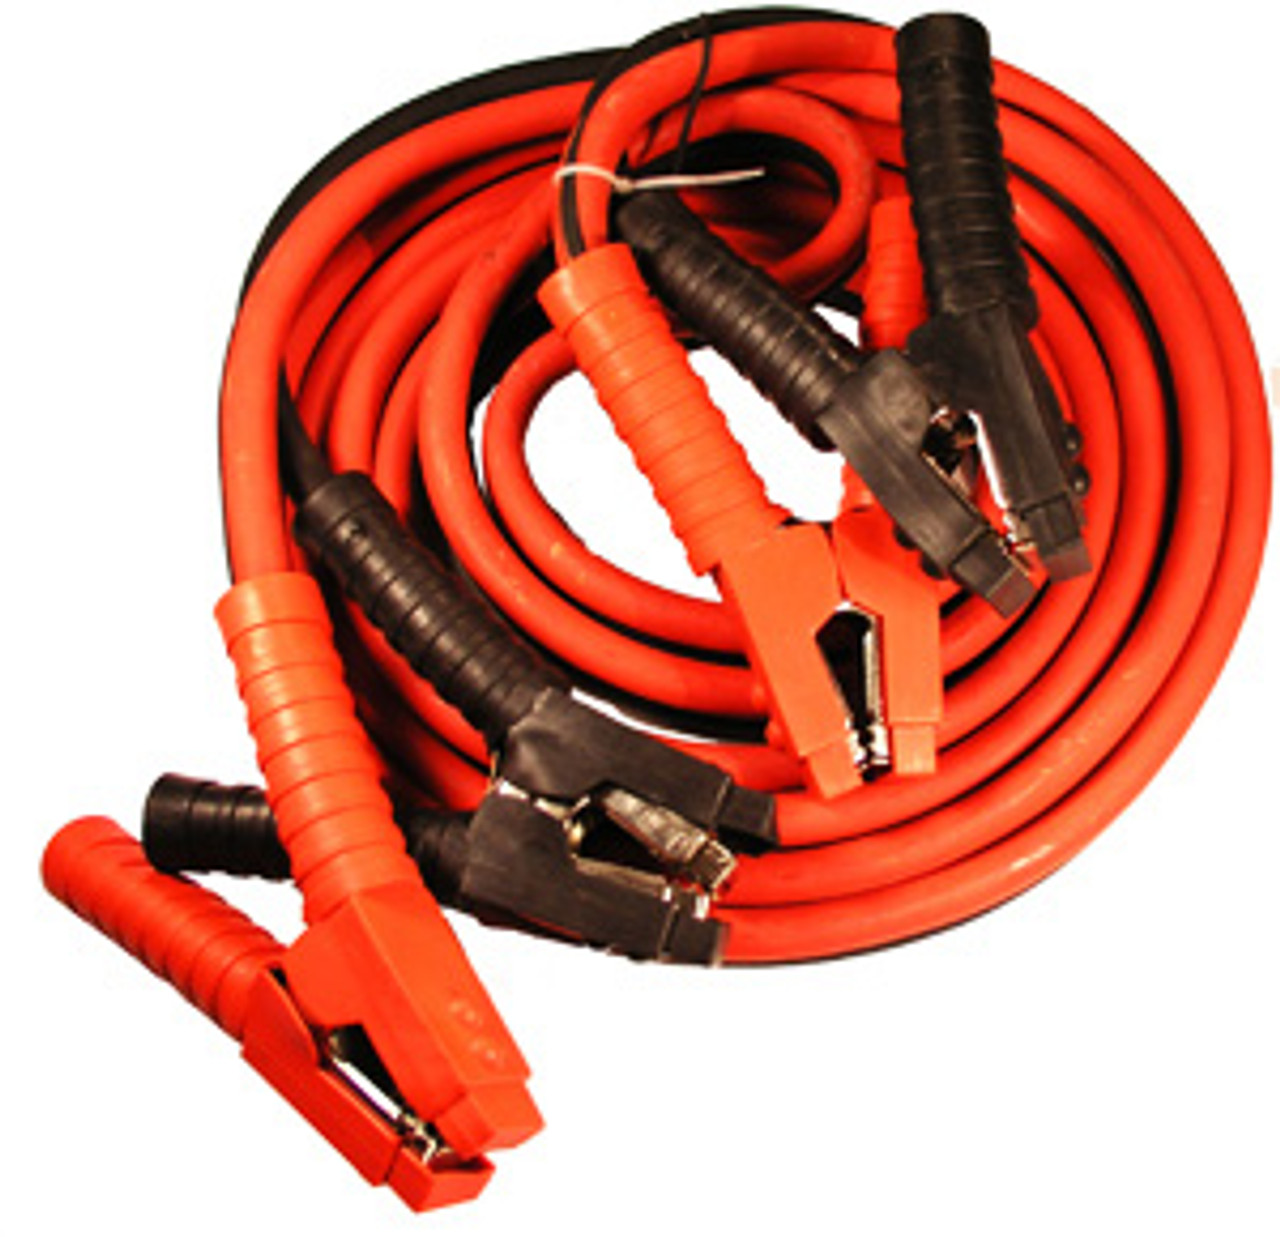 1 AWG 800A @ 40' Red & Black PVC Insulated Booster Cable Set  8180B-E